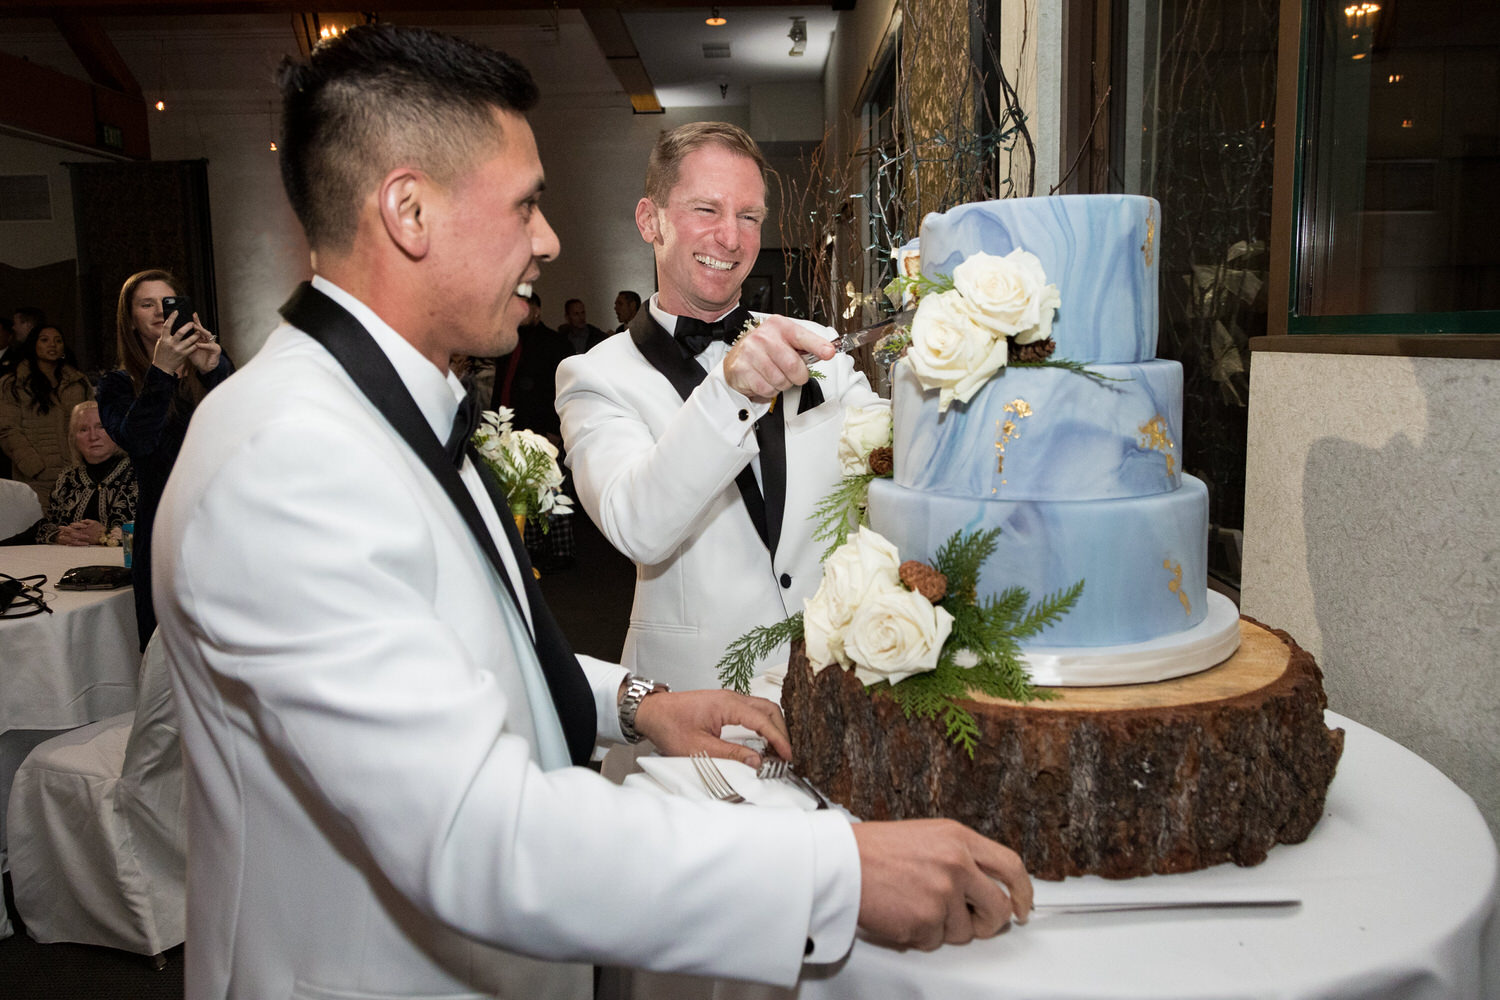 Two grooms cut their blue marbled fondant cake at their reception in the Mountain Room.